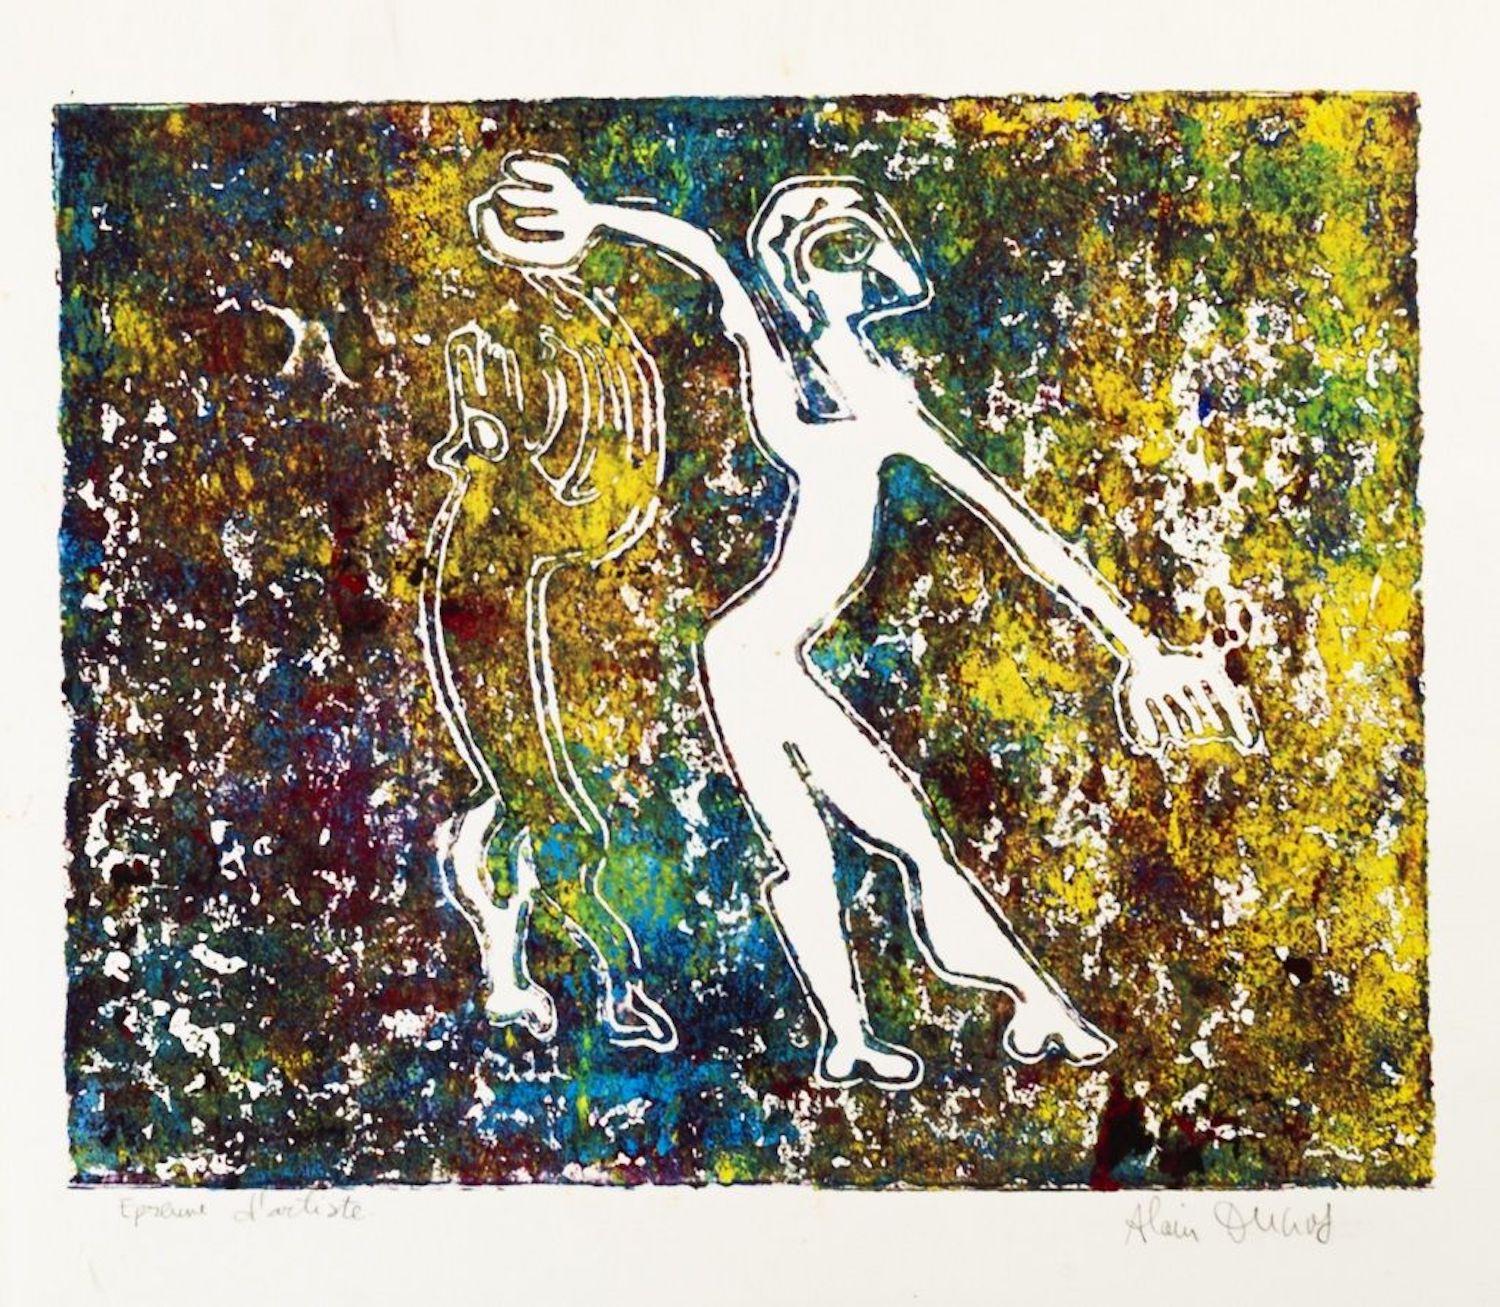 Shape of Man is a colored artwork realized during the 1970s by Alain Ducros. 

Mixed colored lithograph. 

Hand-signed on the lower right.

Artist proof (as reported on the lower left). 